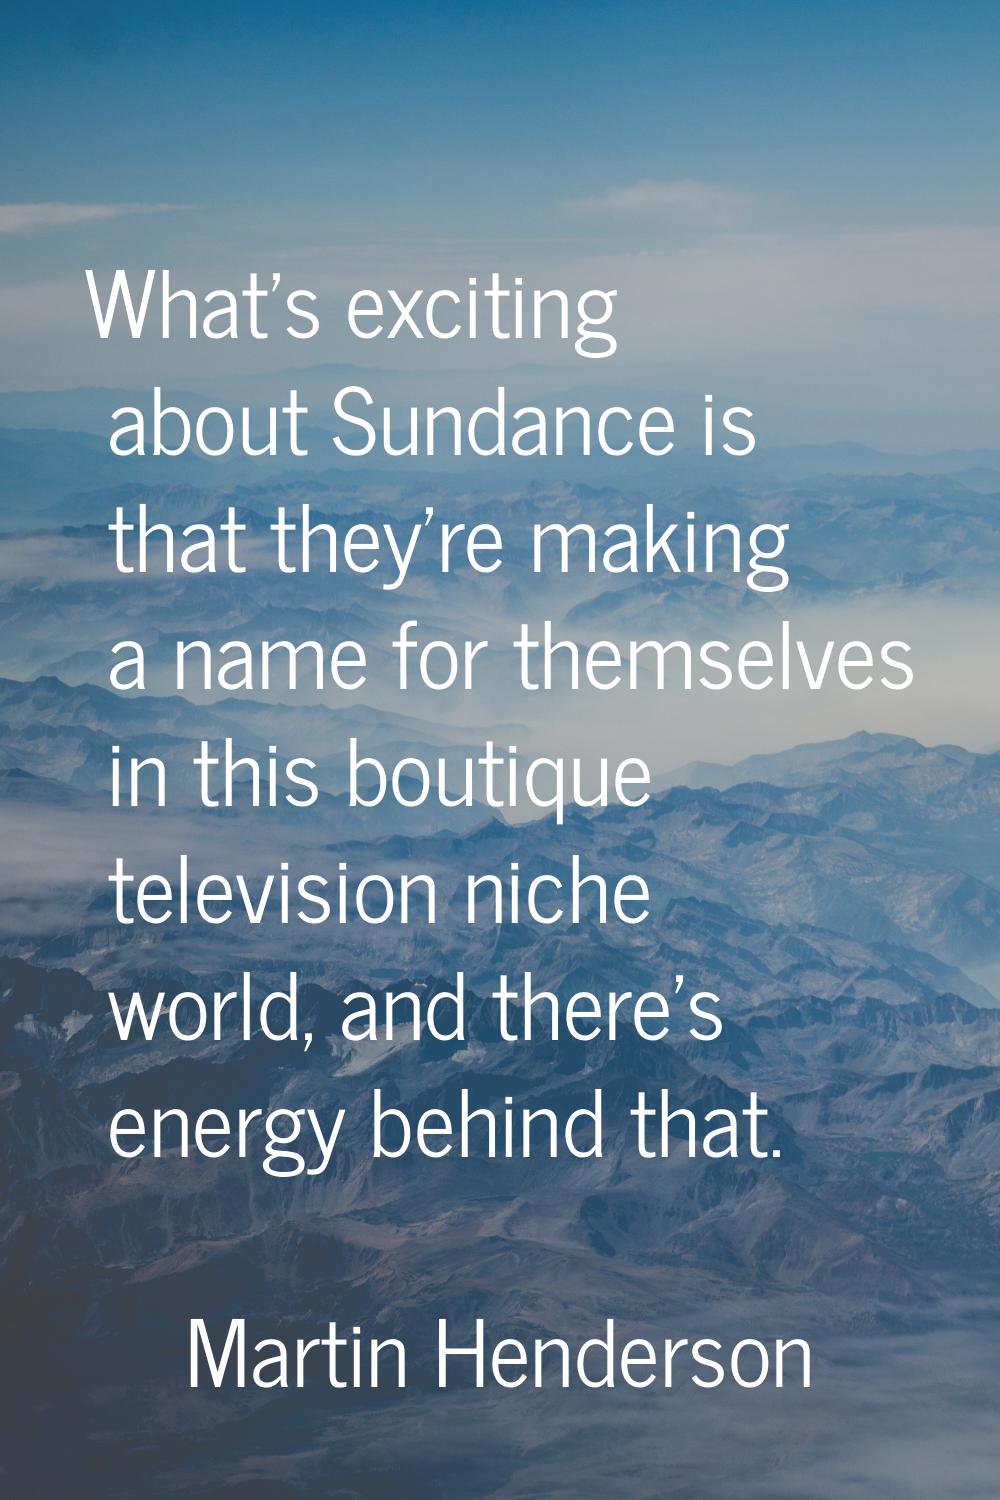 What's exciting about Sundance is that they're making a name for themselves in this boutique televi